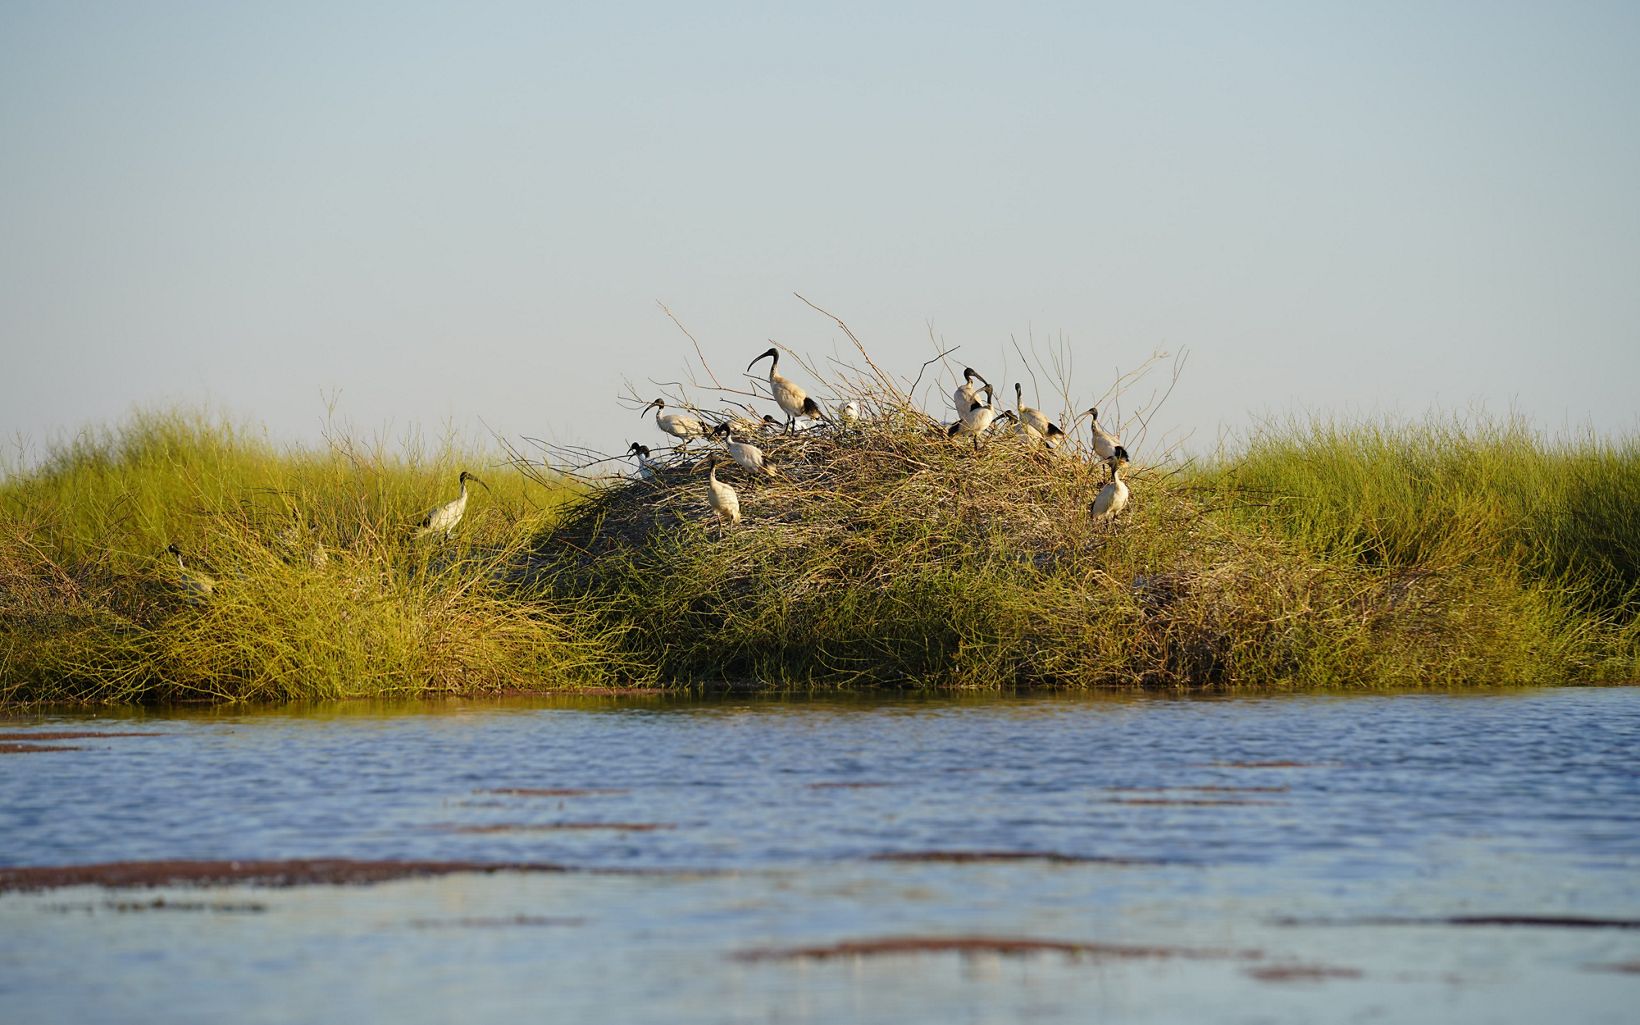 Australian White Ibis nesting colony at Gayini © Vince Bucello/Midstate Video Productions